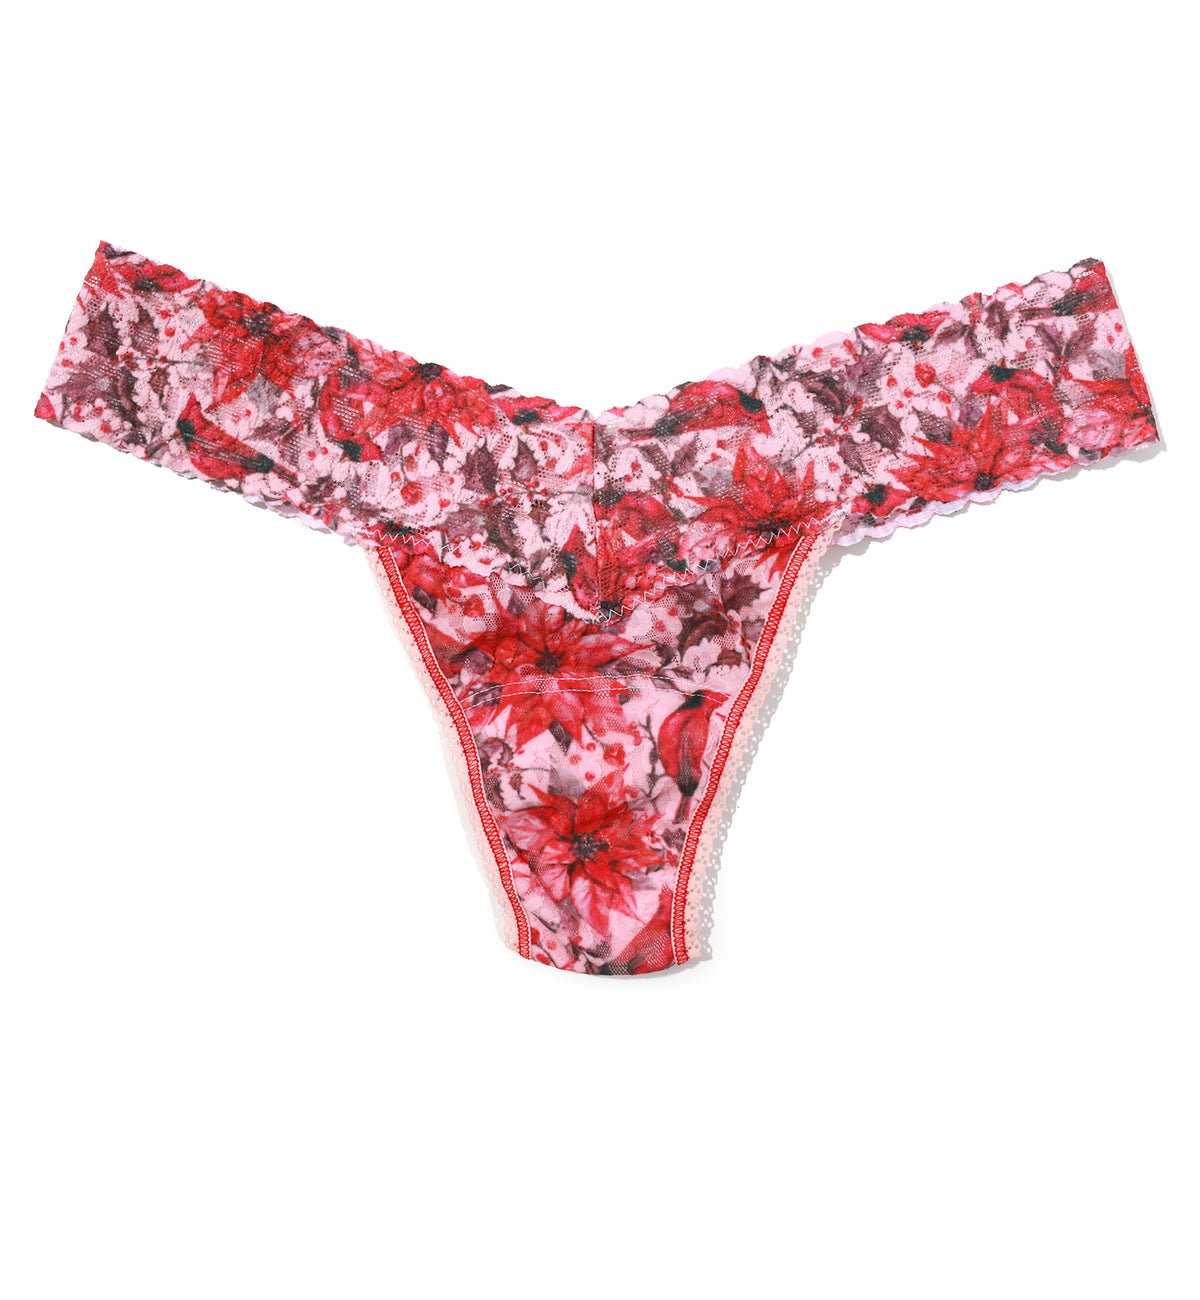 Hanky Panky Signature Lace Printed Low Rise Thong (PR4911P),Poinsettia - Poinsettia,One Size